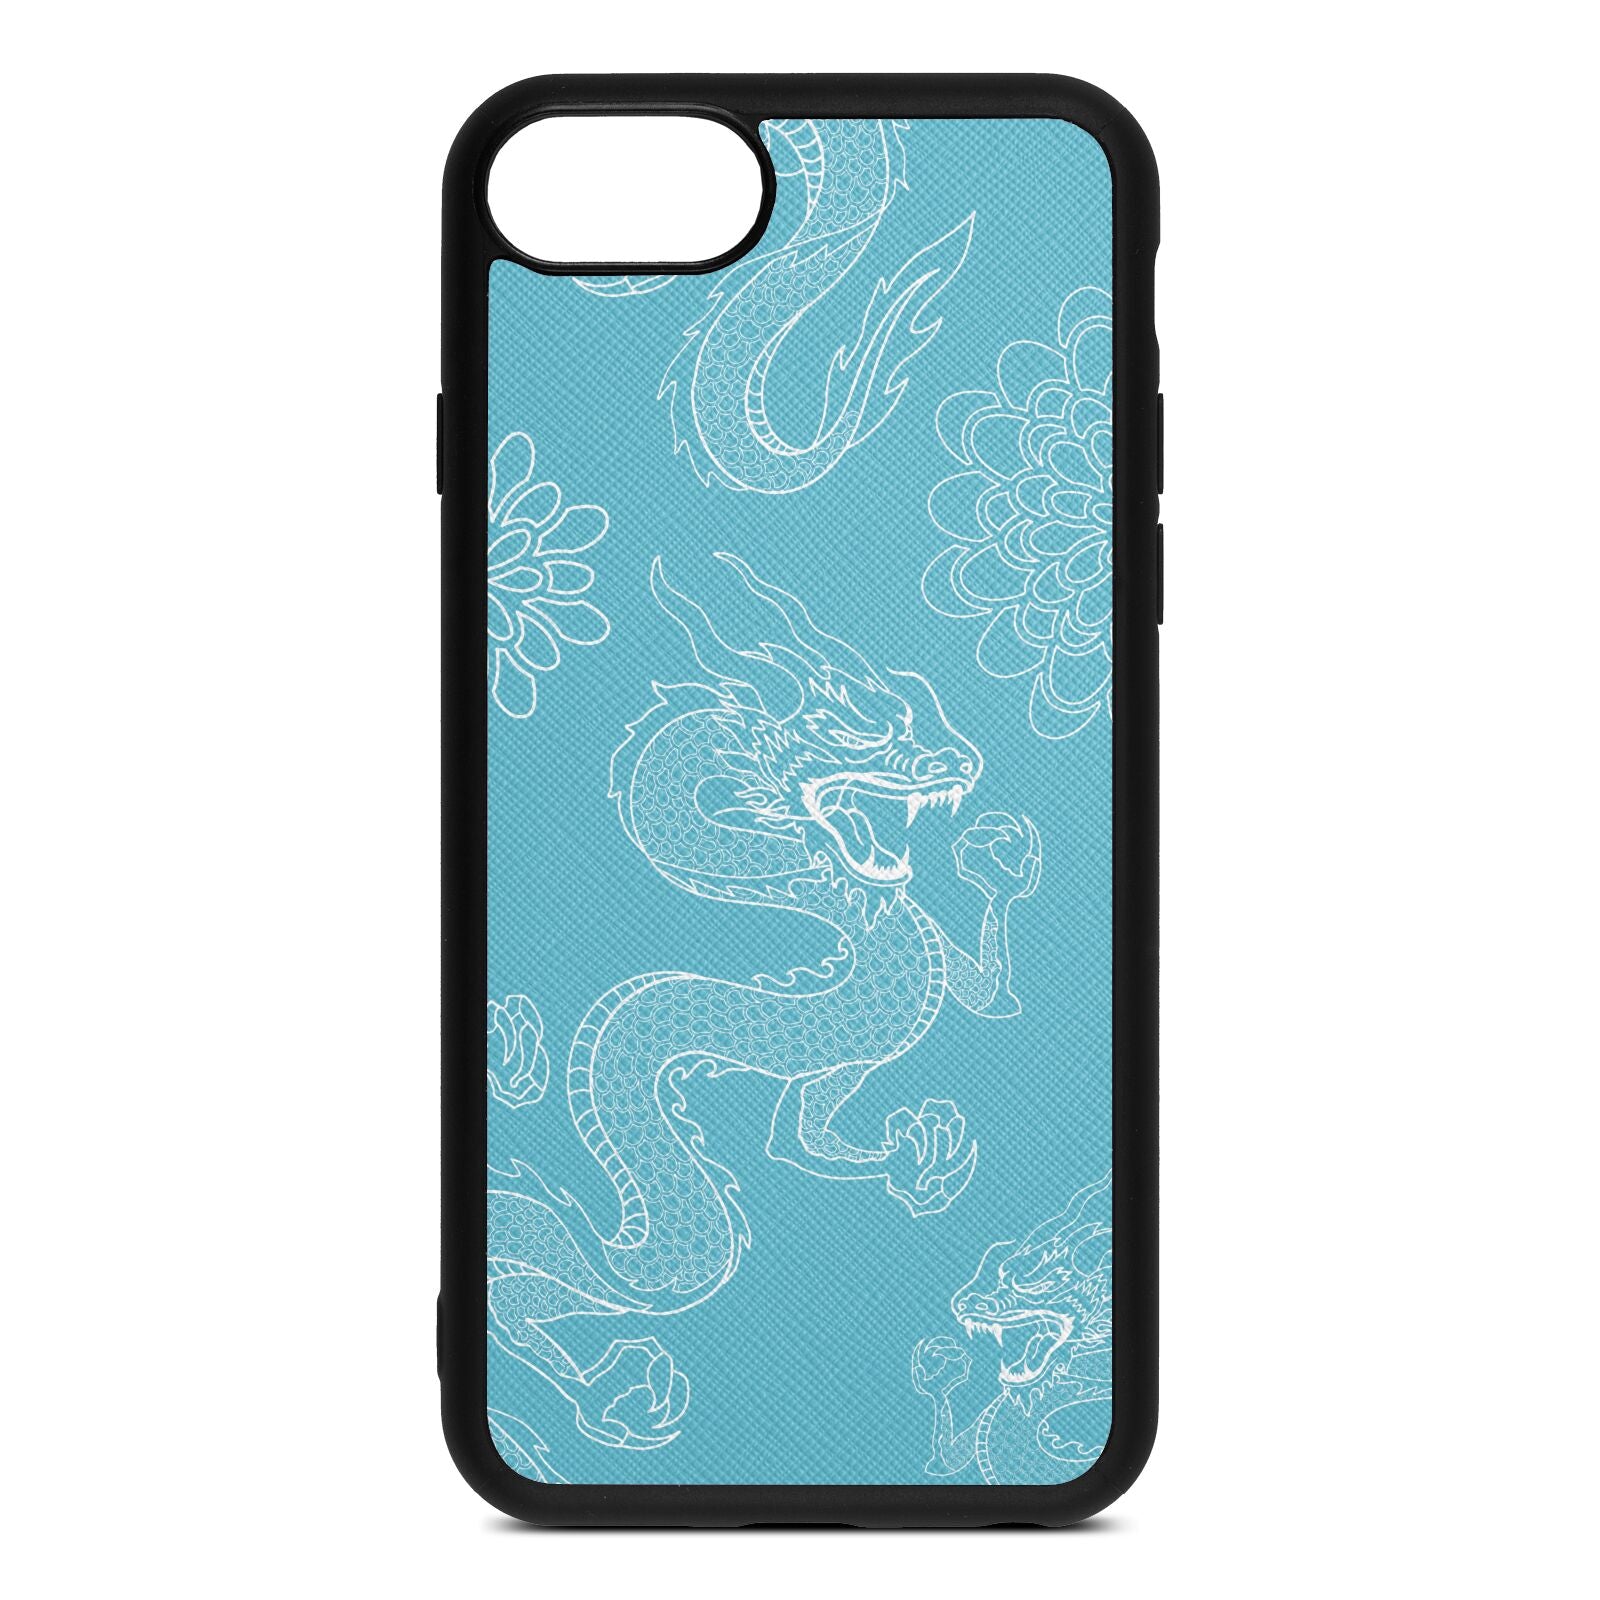 Dragons Sky Saffiano Leather iPhone 8 Case